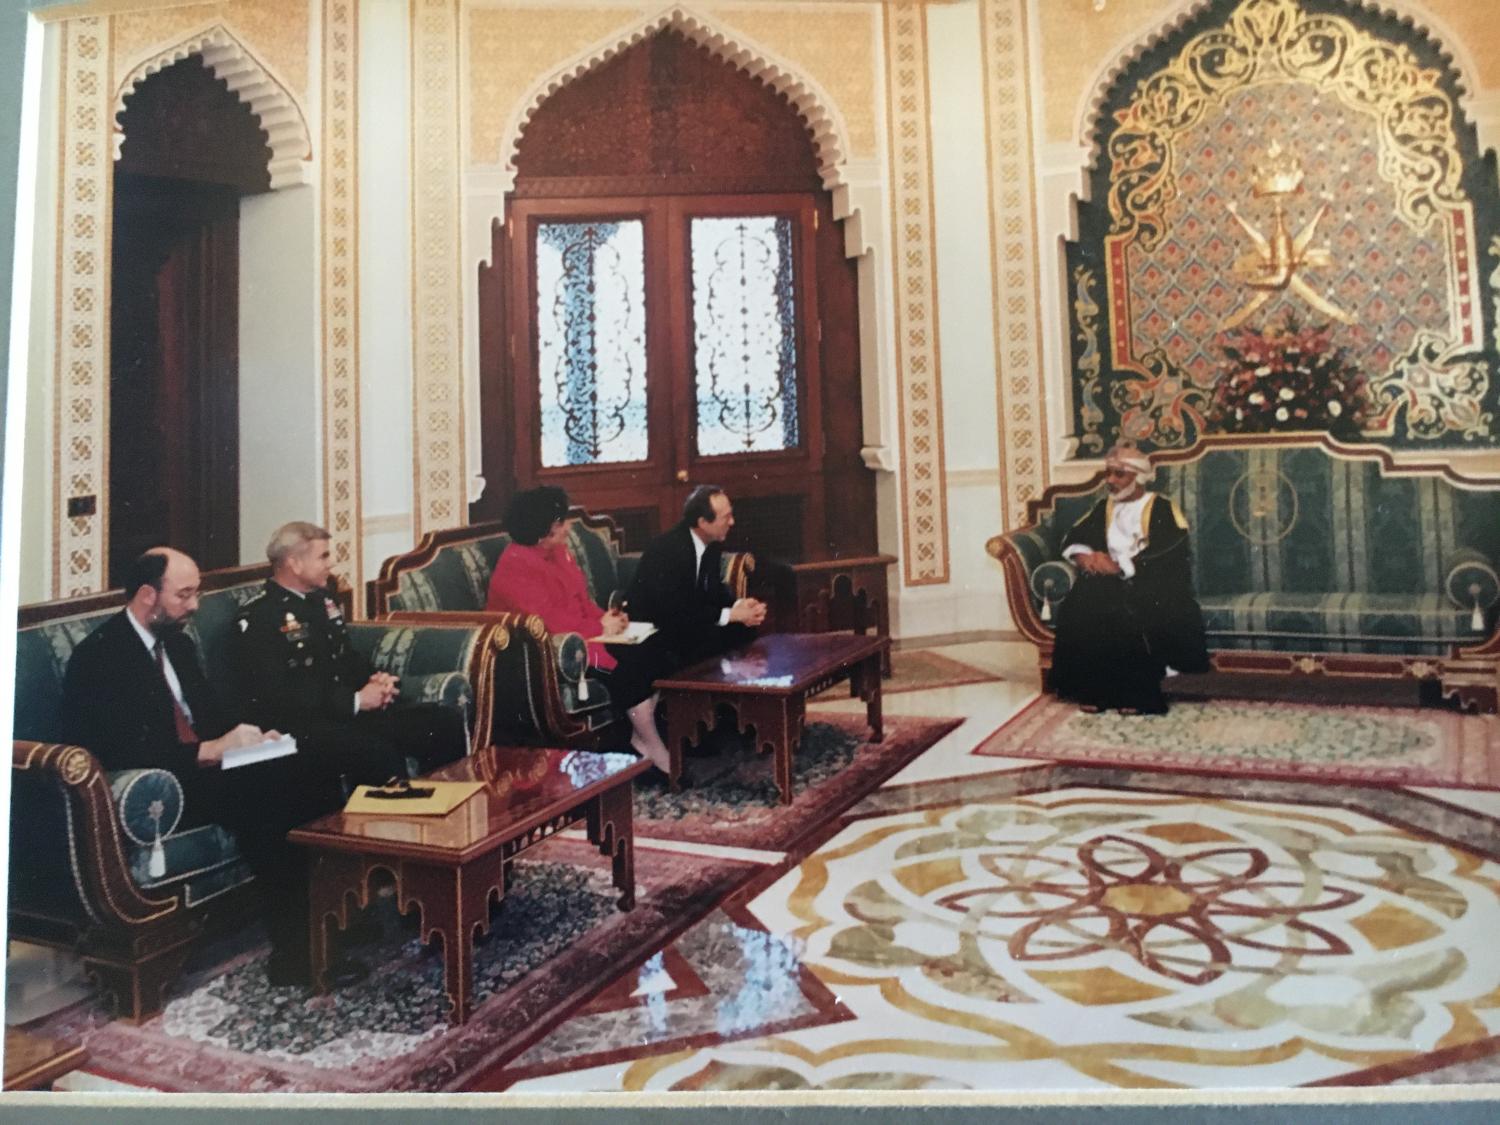 Sultan Qaboos meeting with Secretary of Defense William Perry in the Royal Palace in Muscat in 1996.